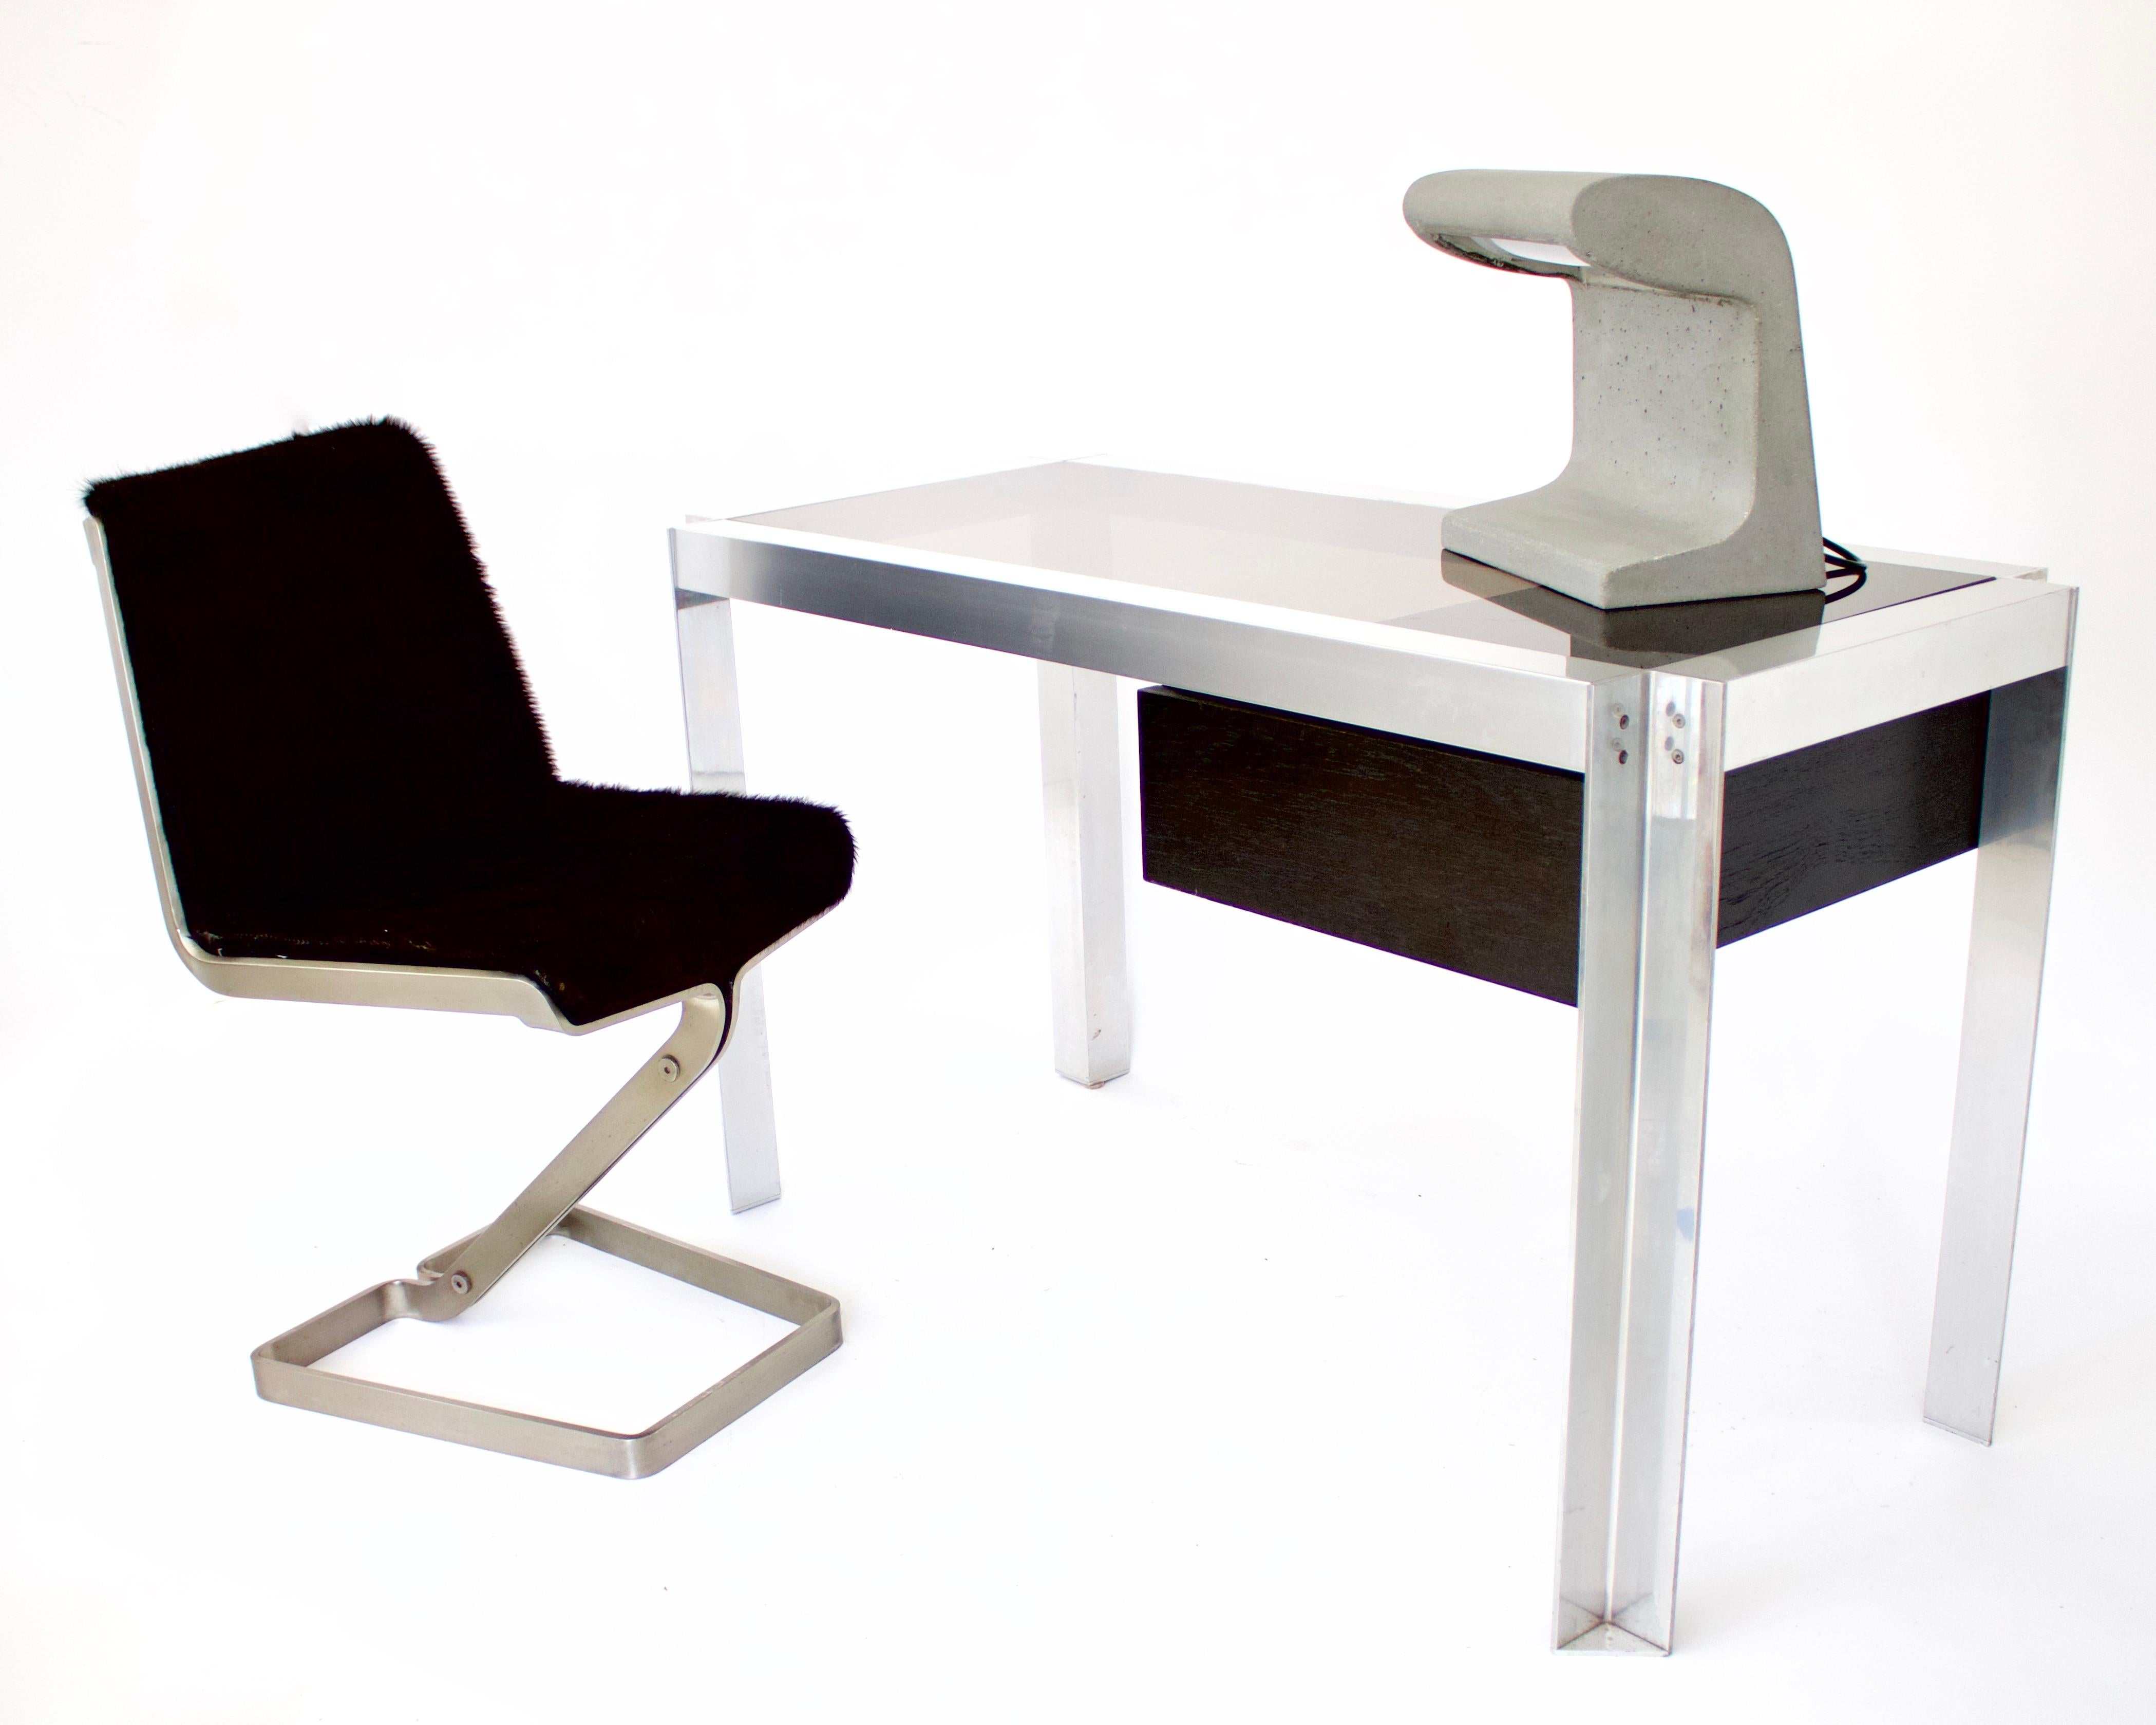 Italian Stainless Steel Desk Chair by Forma Nova, circa 1970 For Sale 6